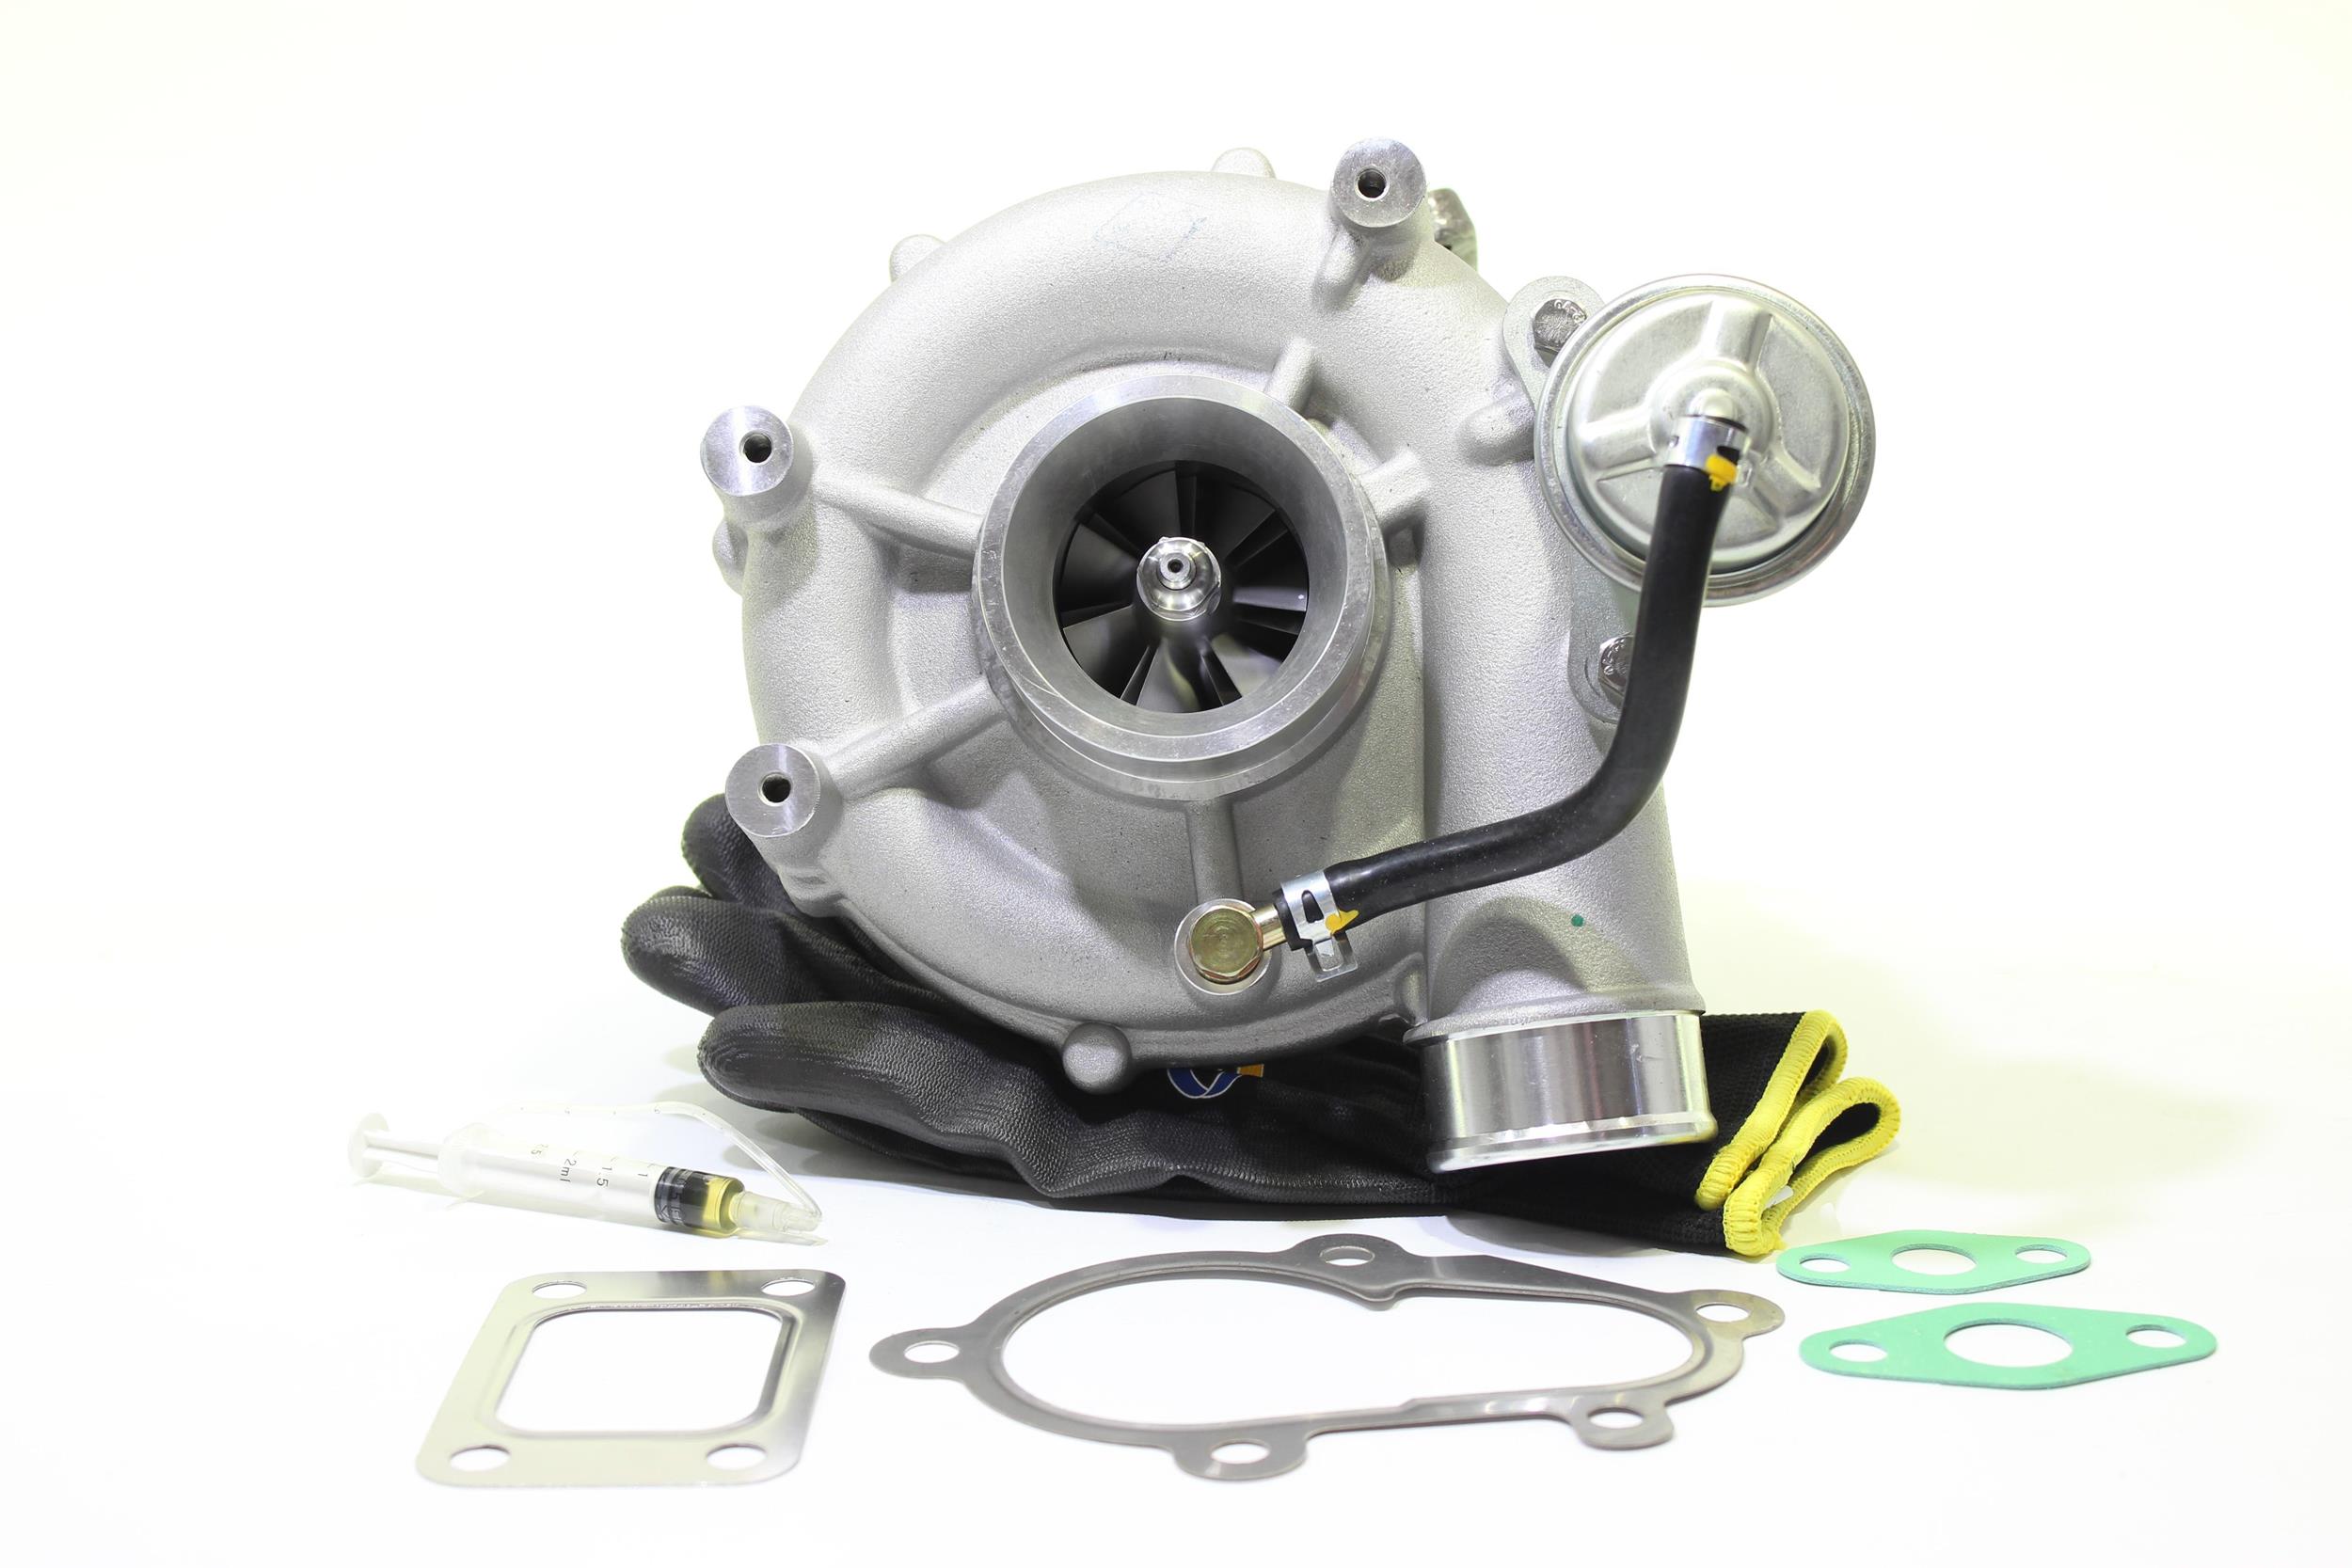 ALANKO 10900688 Turbocharger Exhaust Turbocharger, Incl. Gasket Set, with attachment material